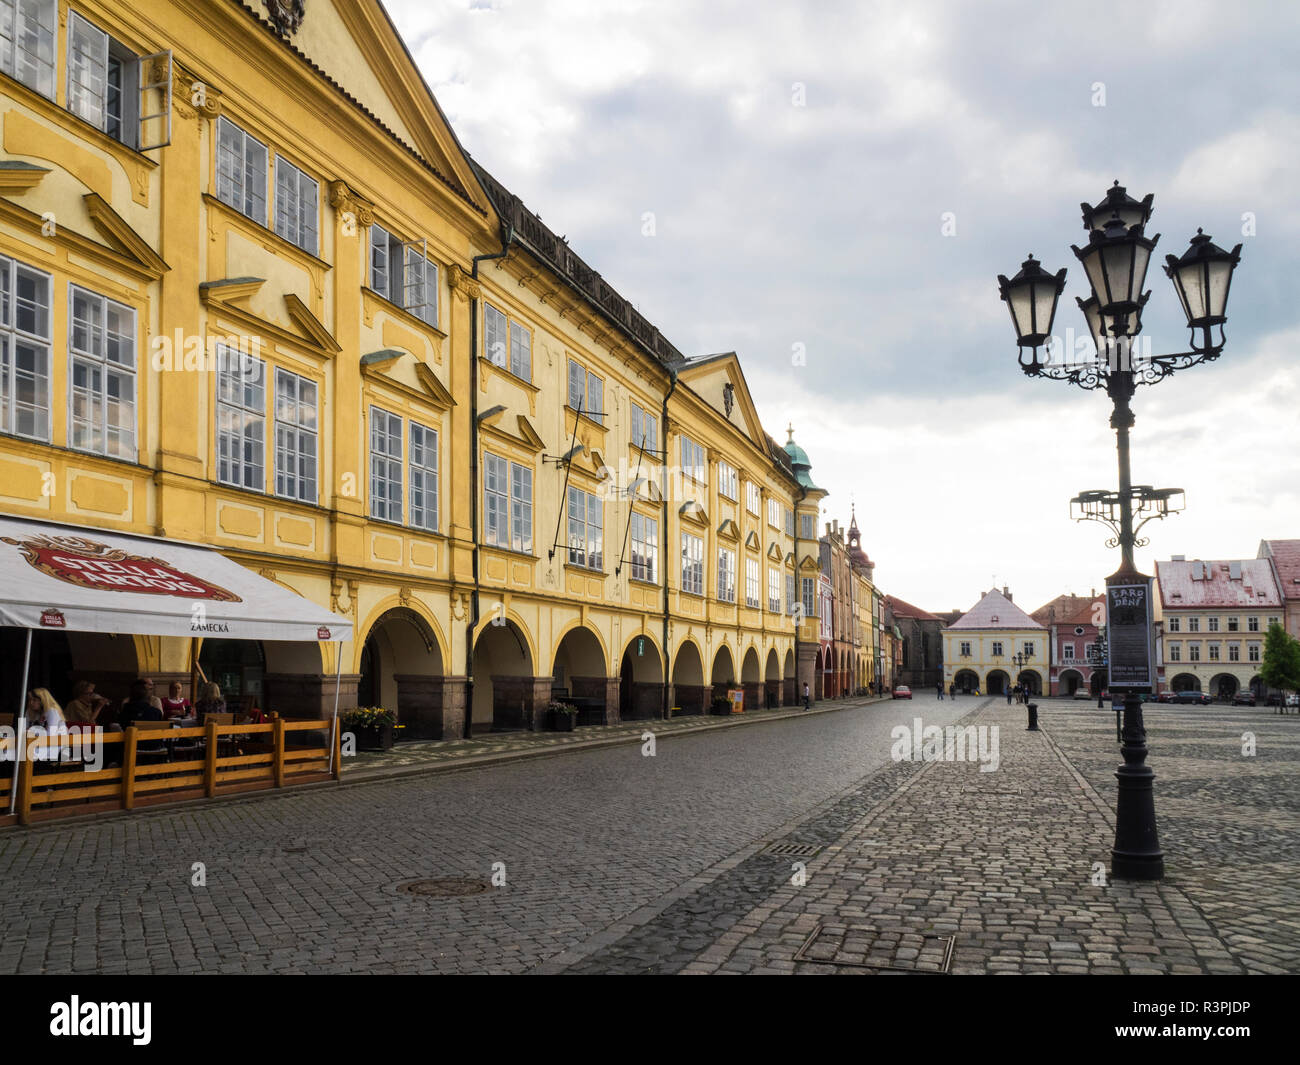 Jicin region High Resolution Stock Photography and Images - Alamy